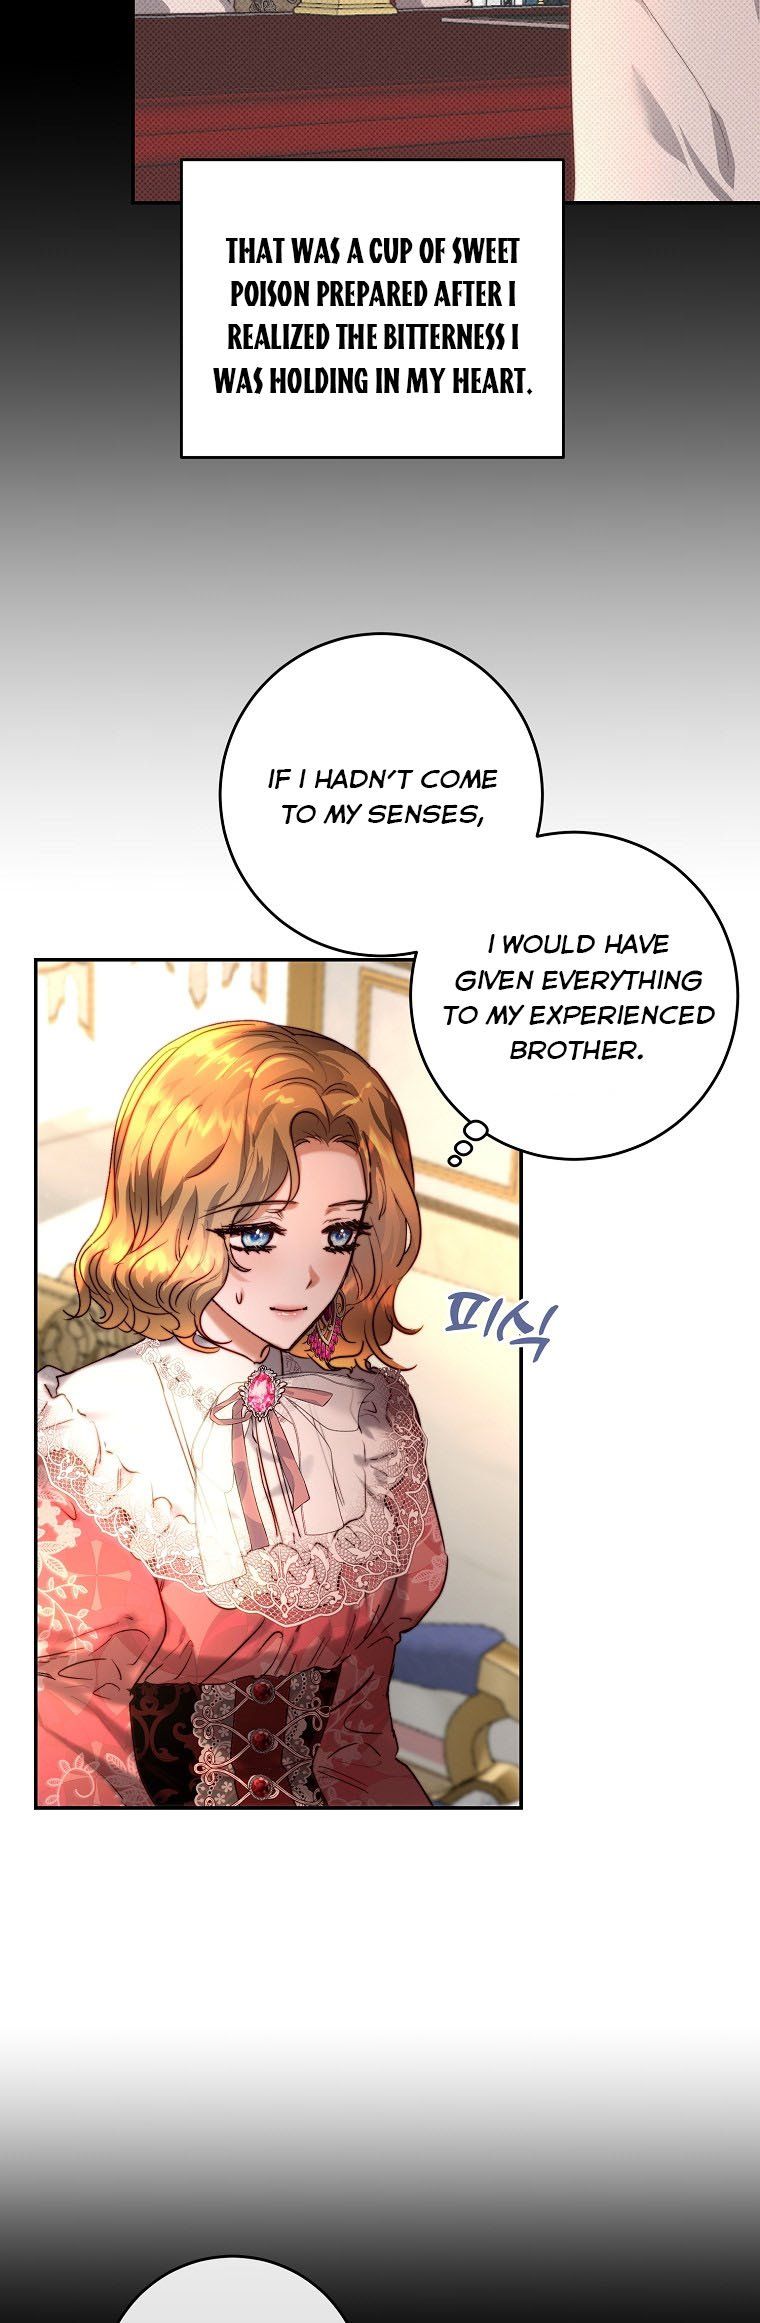 The Princess Blooms as a Crazy Flower Chapter 38.5 page 6